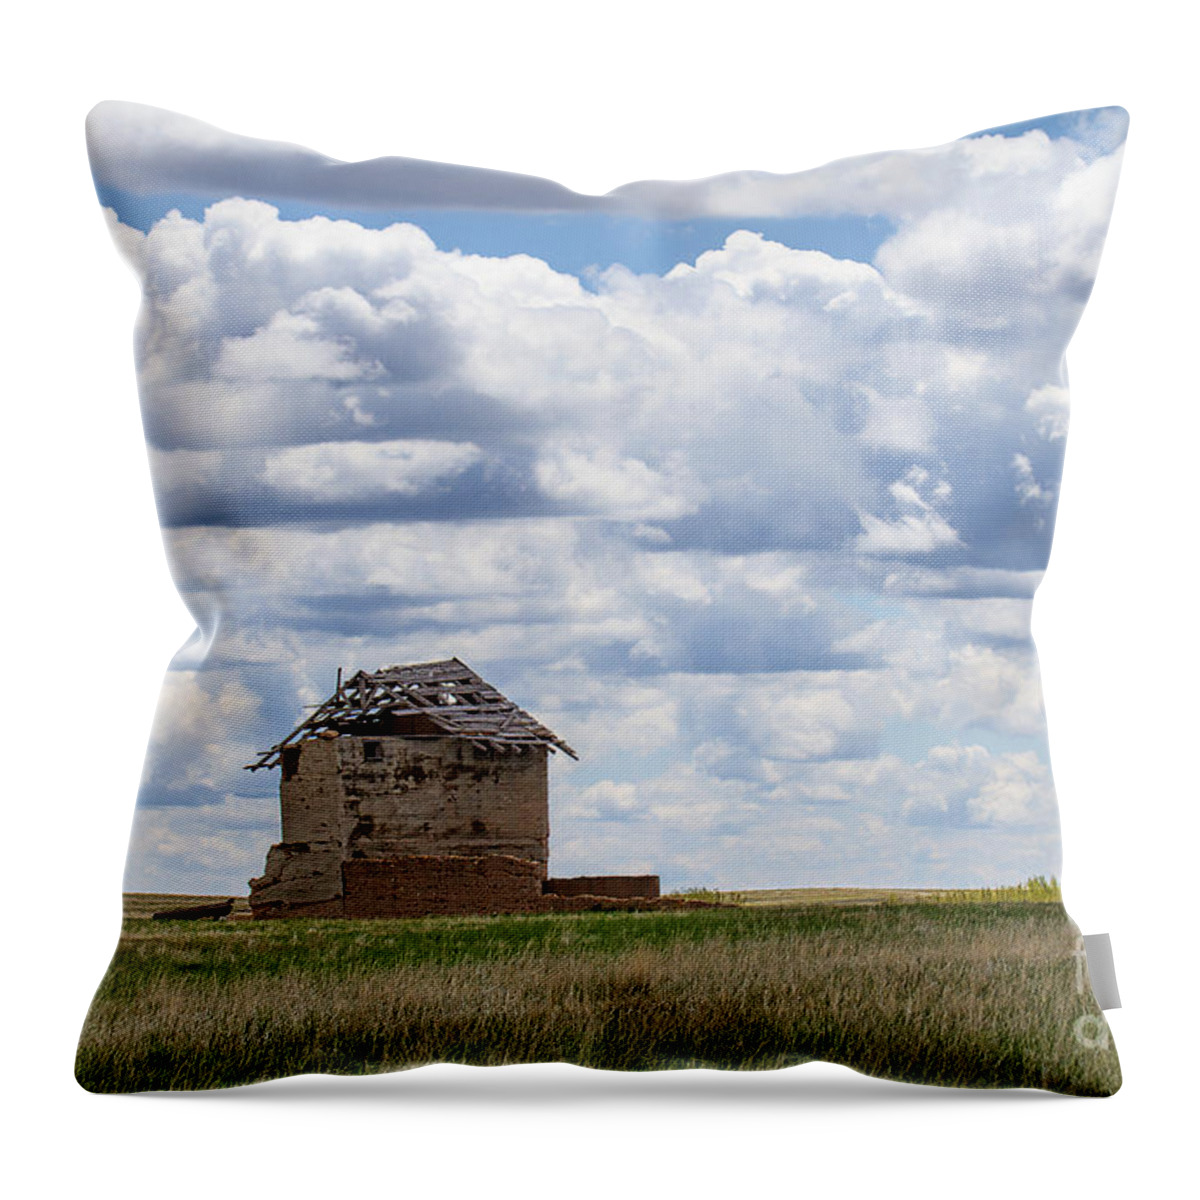 Colorado Plains Throw Pillow featuring the photograph A Solitary Existance by Jim Garrison